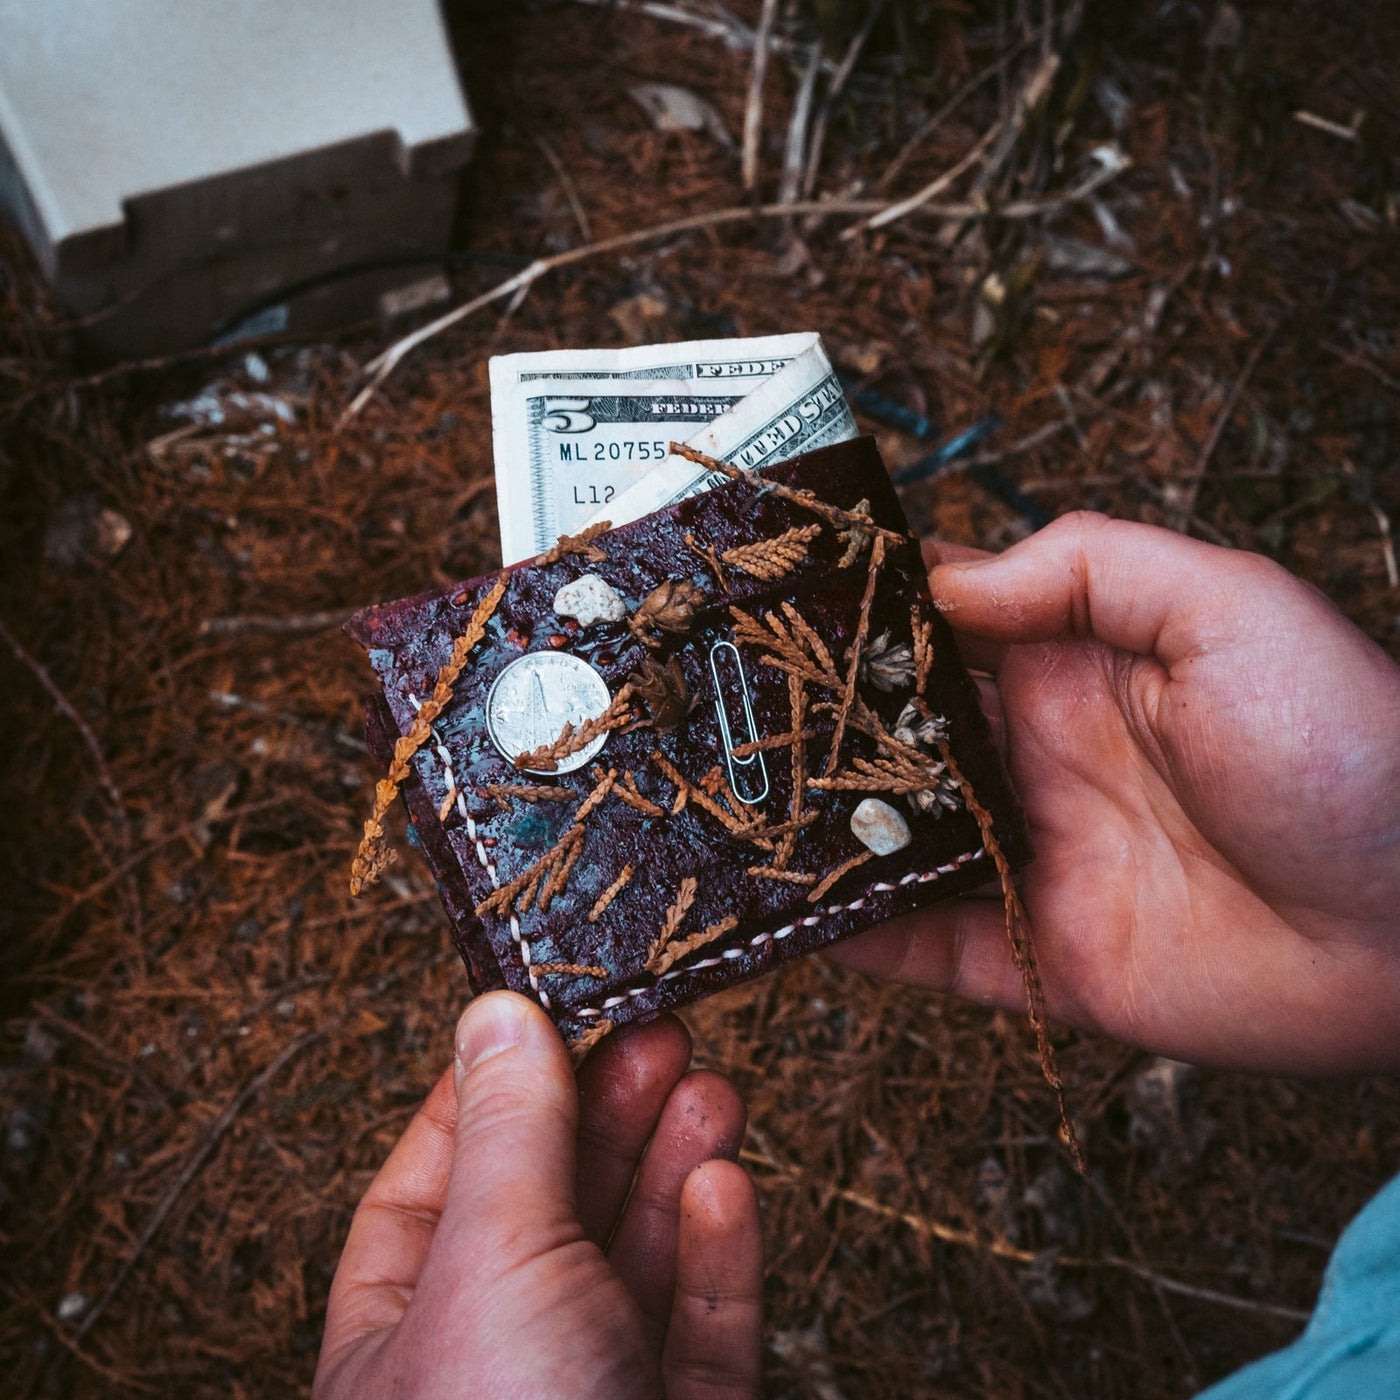 Holding a fruit leather wallet